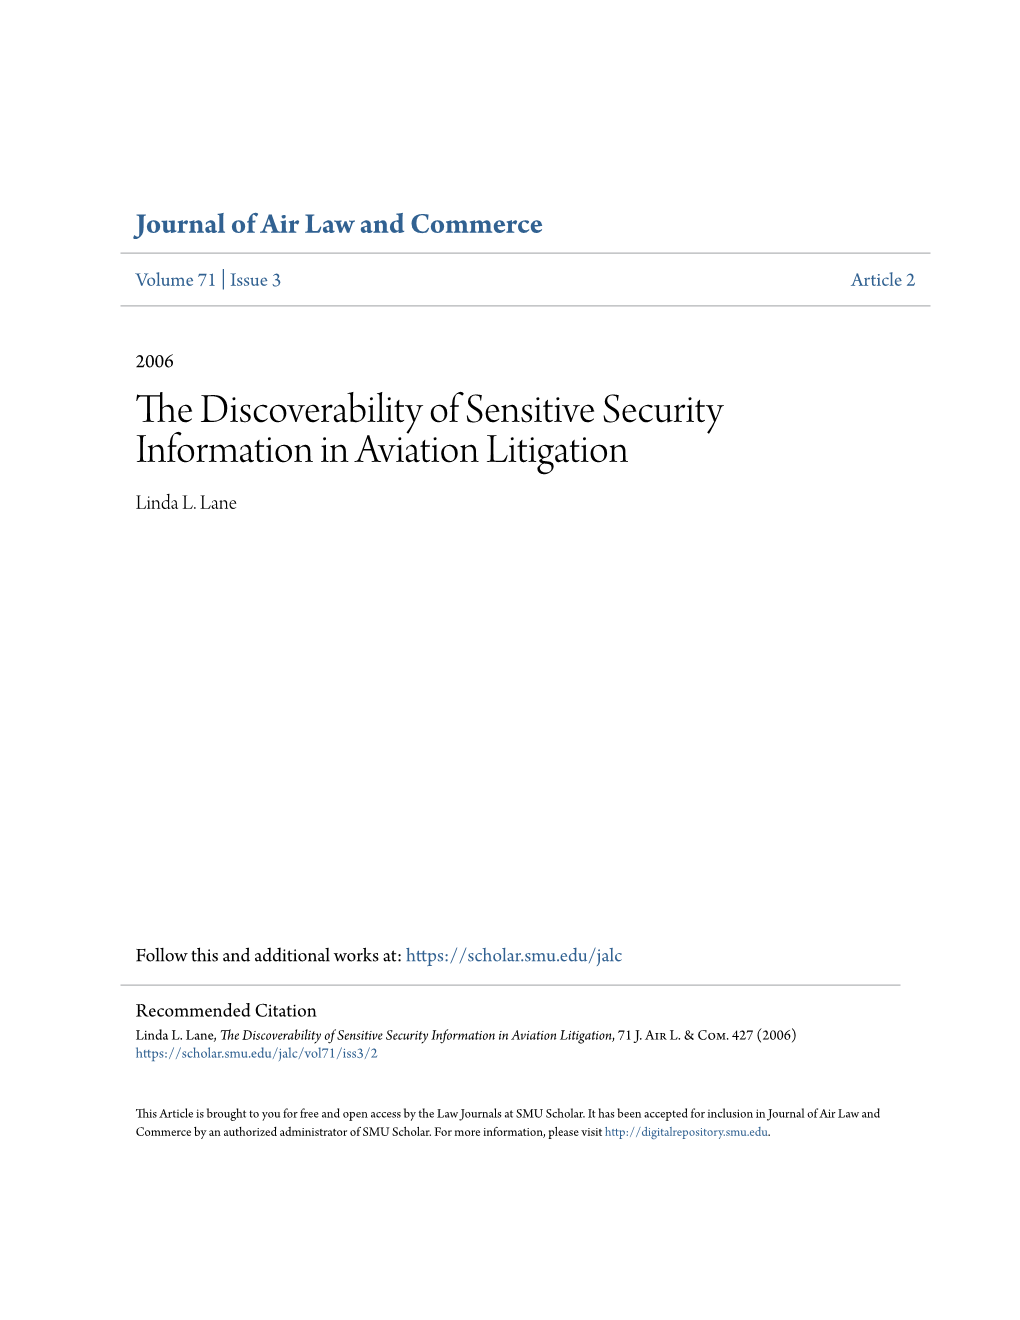 The Discoverability of Sensitive Security Information in Aviation Litigation Linda L